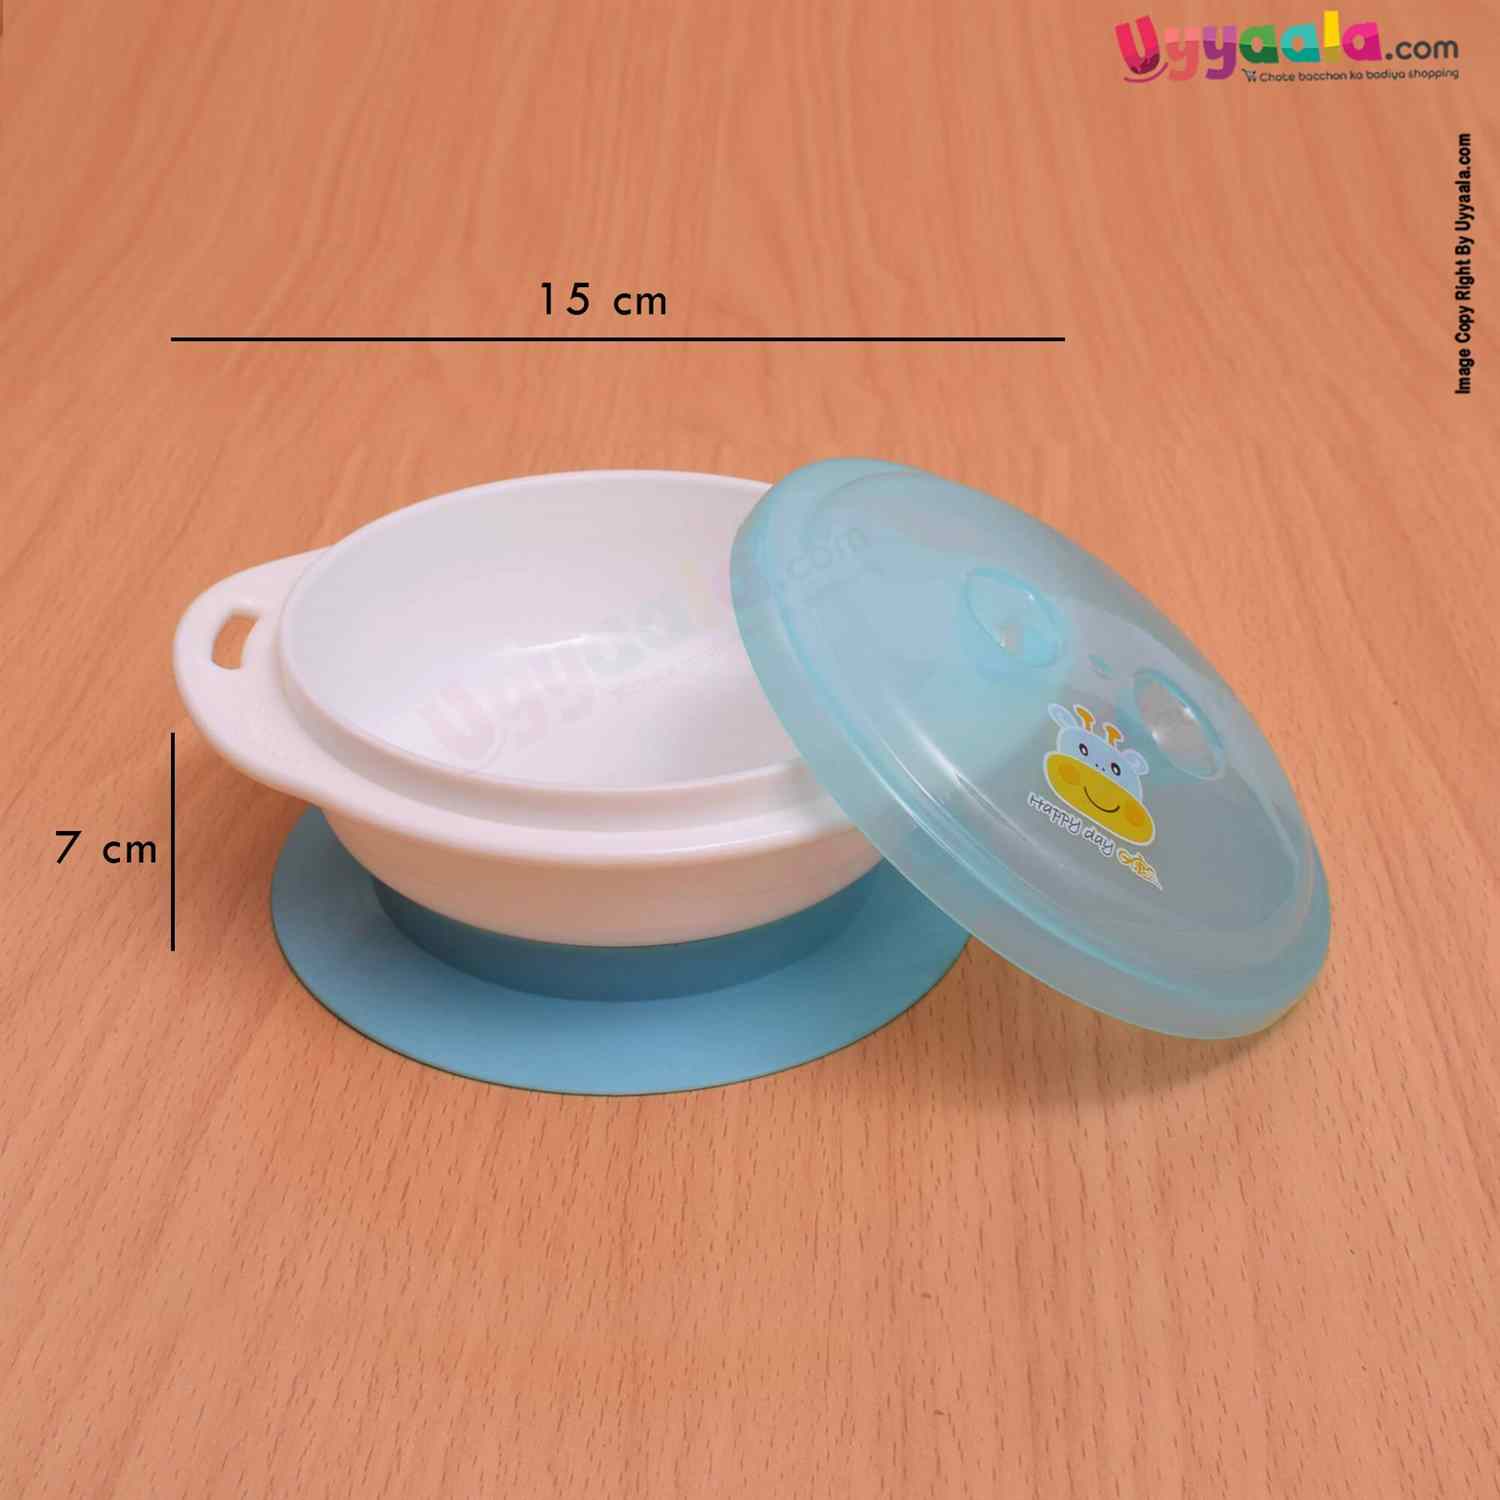 RIKANG Table Suction Bowl, 10+m Age- Blue